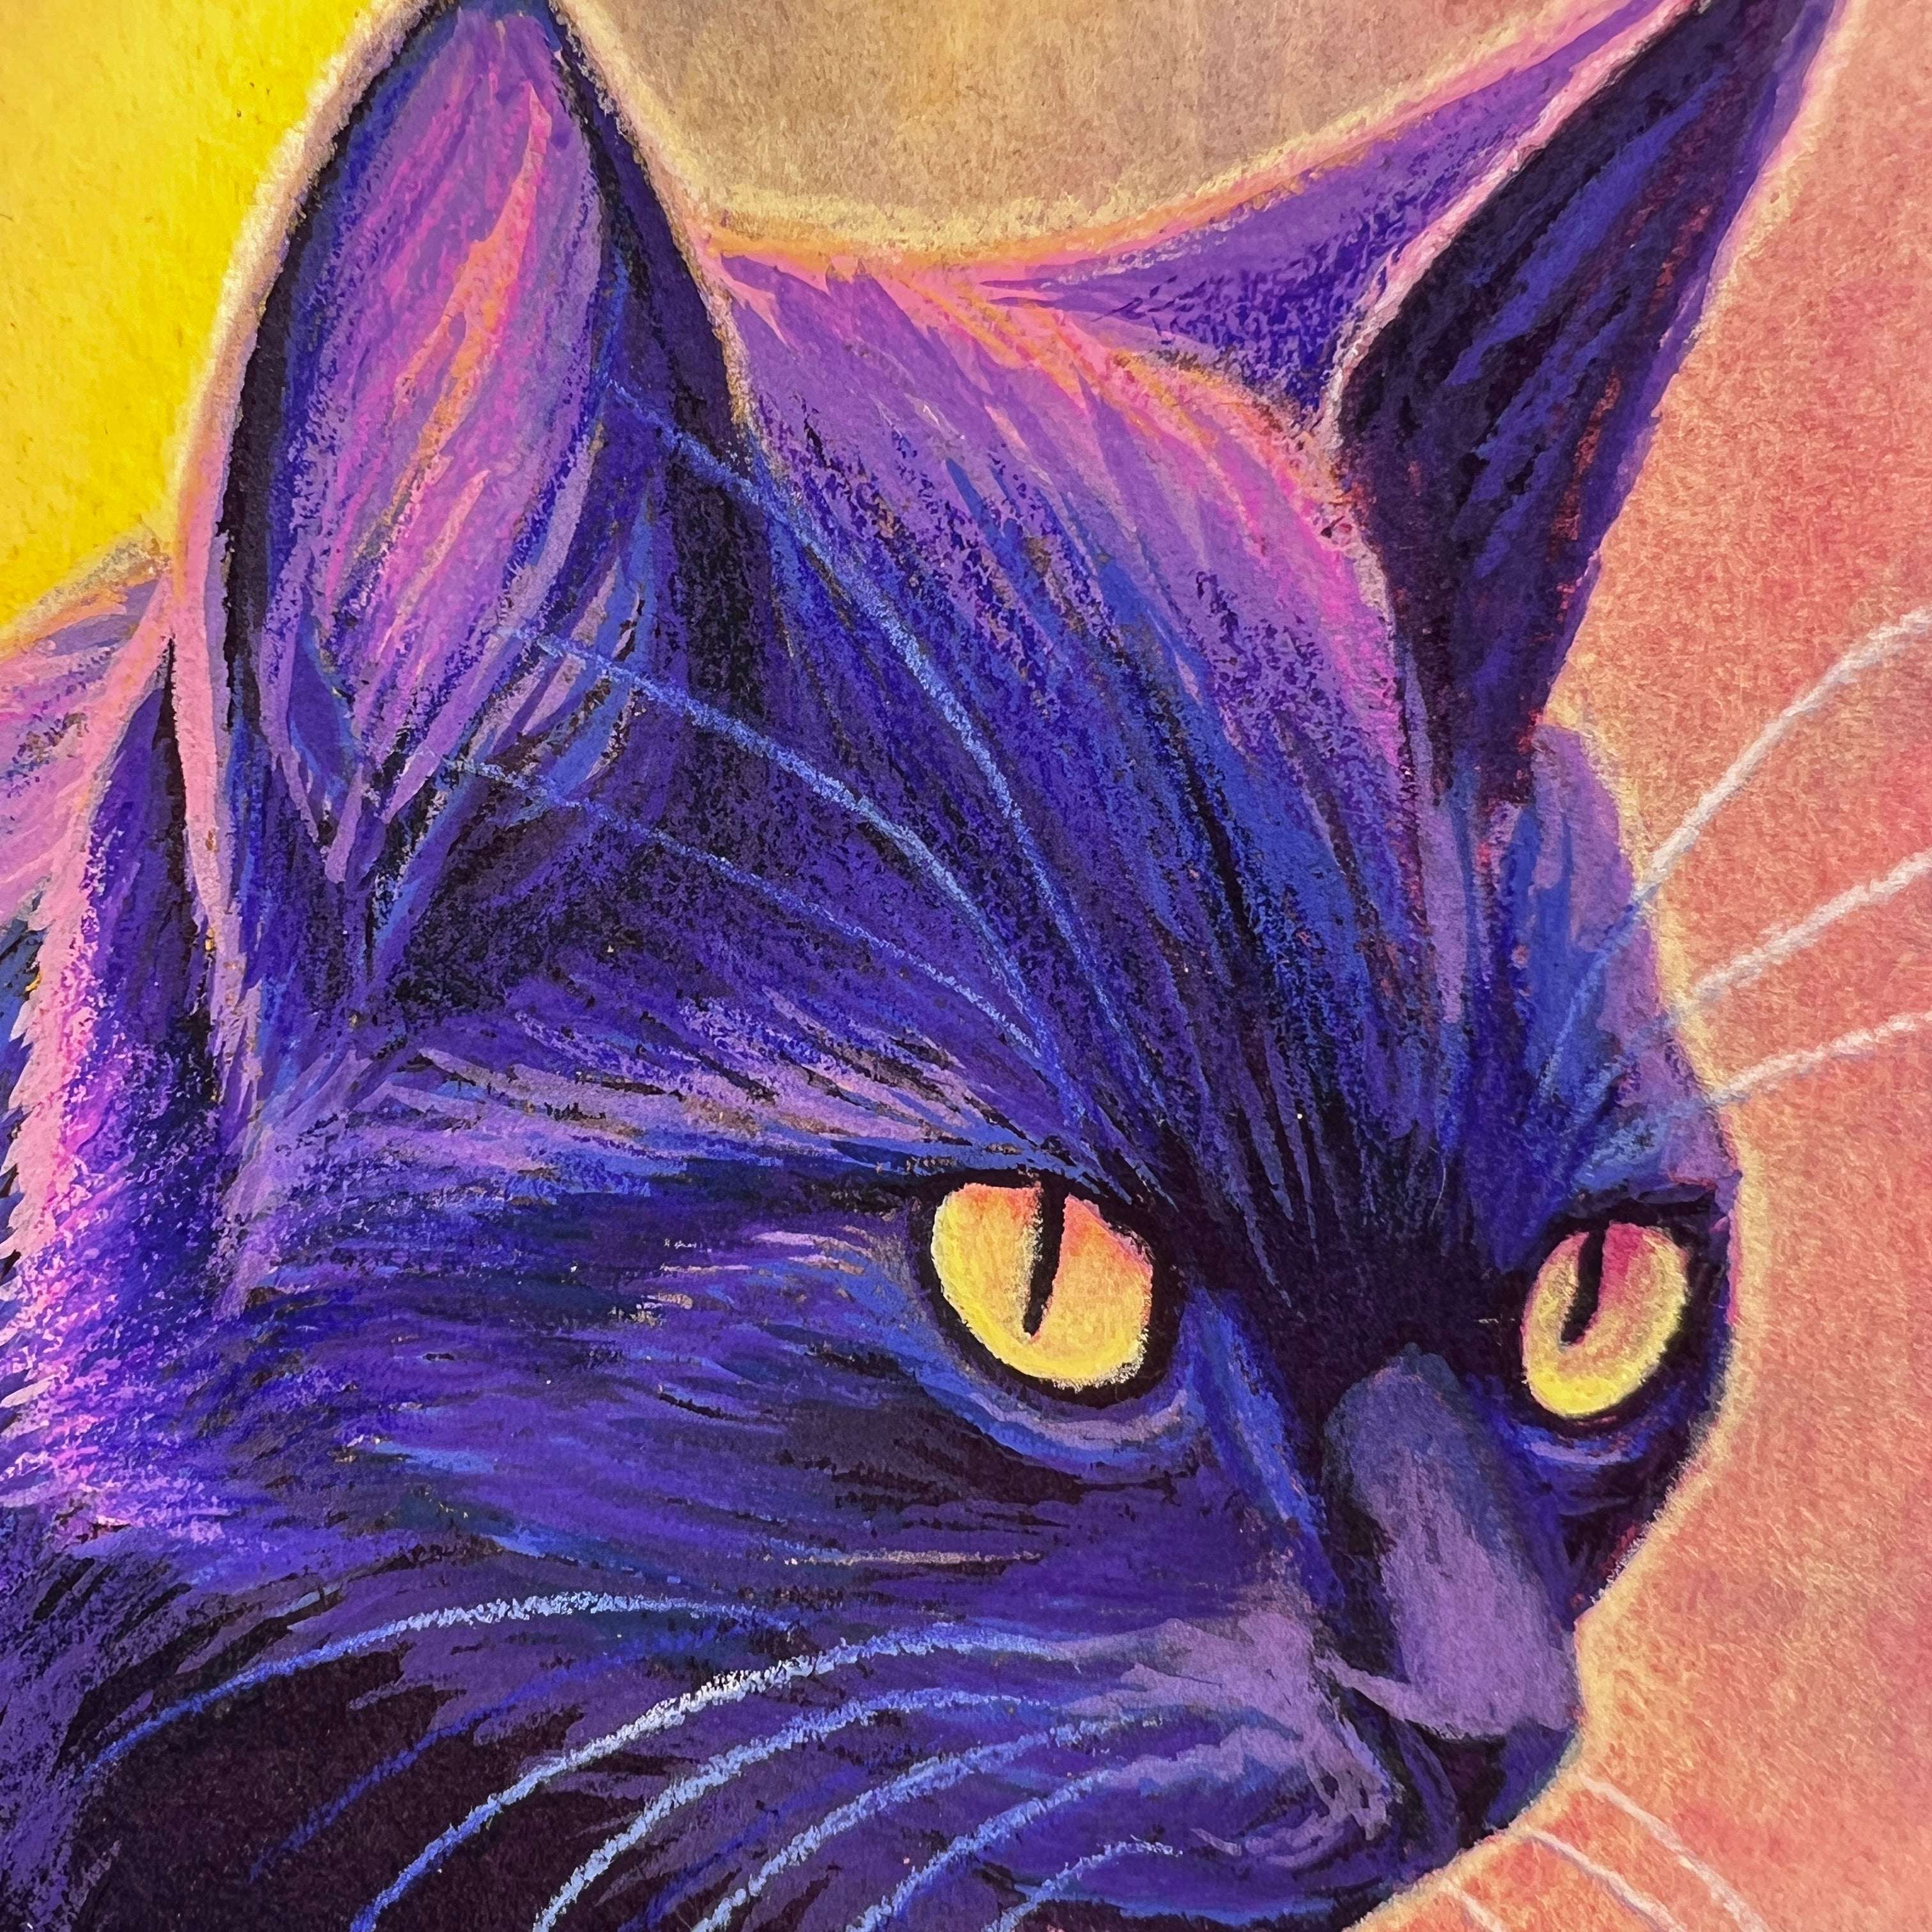 Vibrant pastel drawing of The Cat (Twilight Watch) with intense yellow eyes.